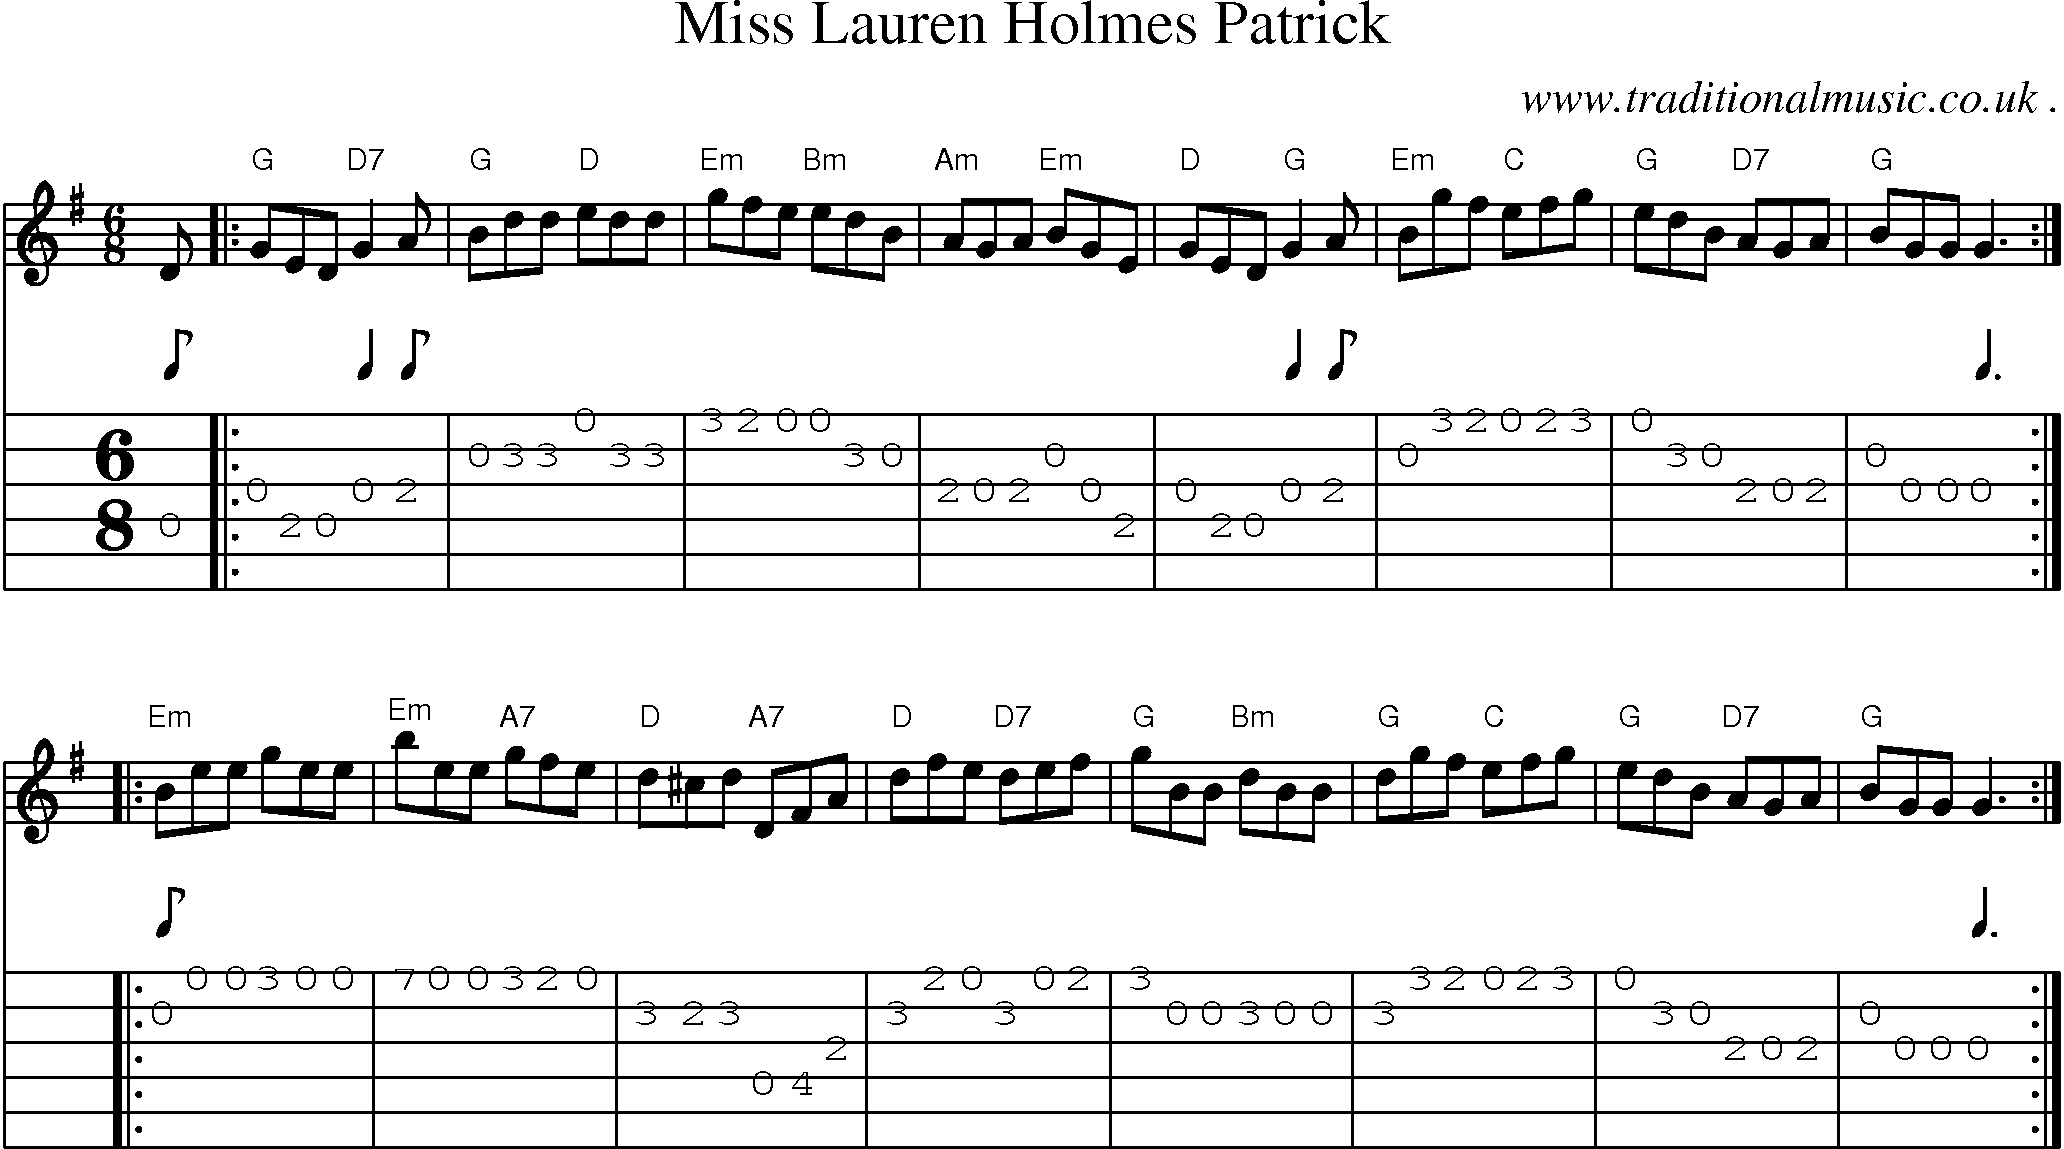 Sheet-music  score, Chords and Guitar Tabs for Miss Lauren Holmes Patrick